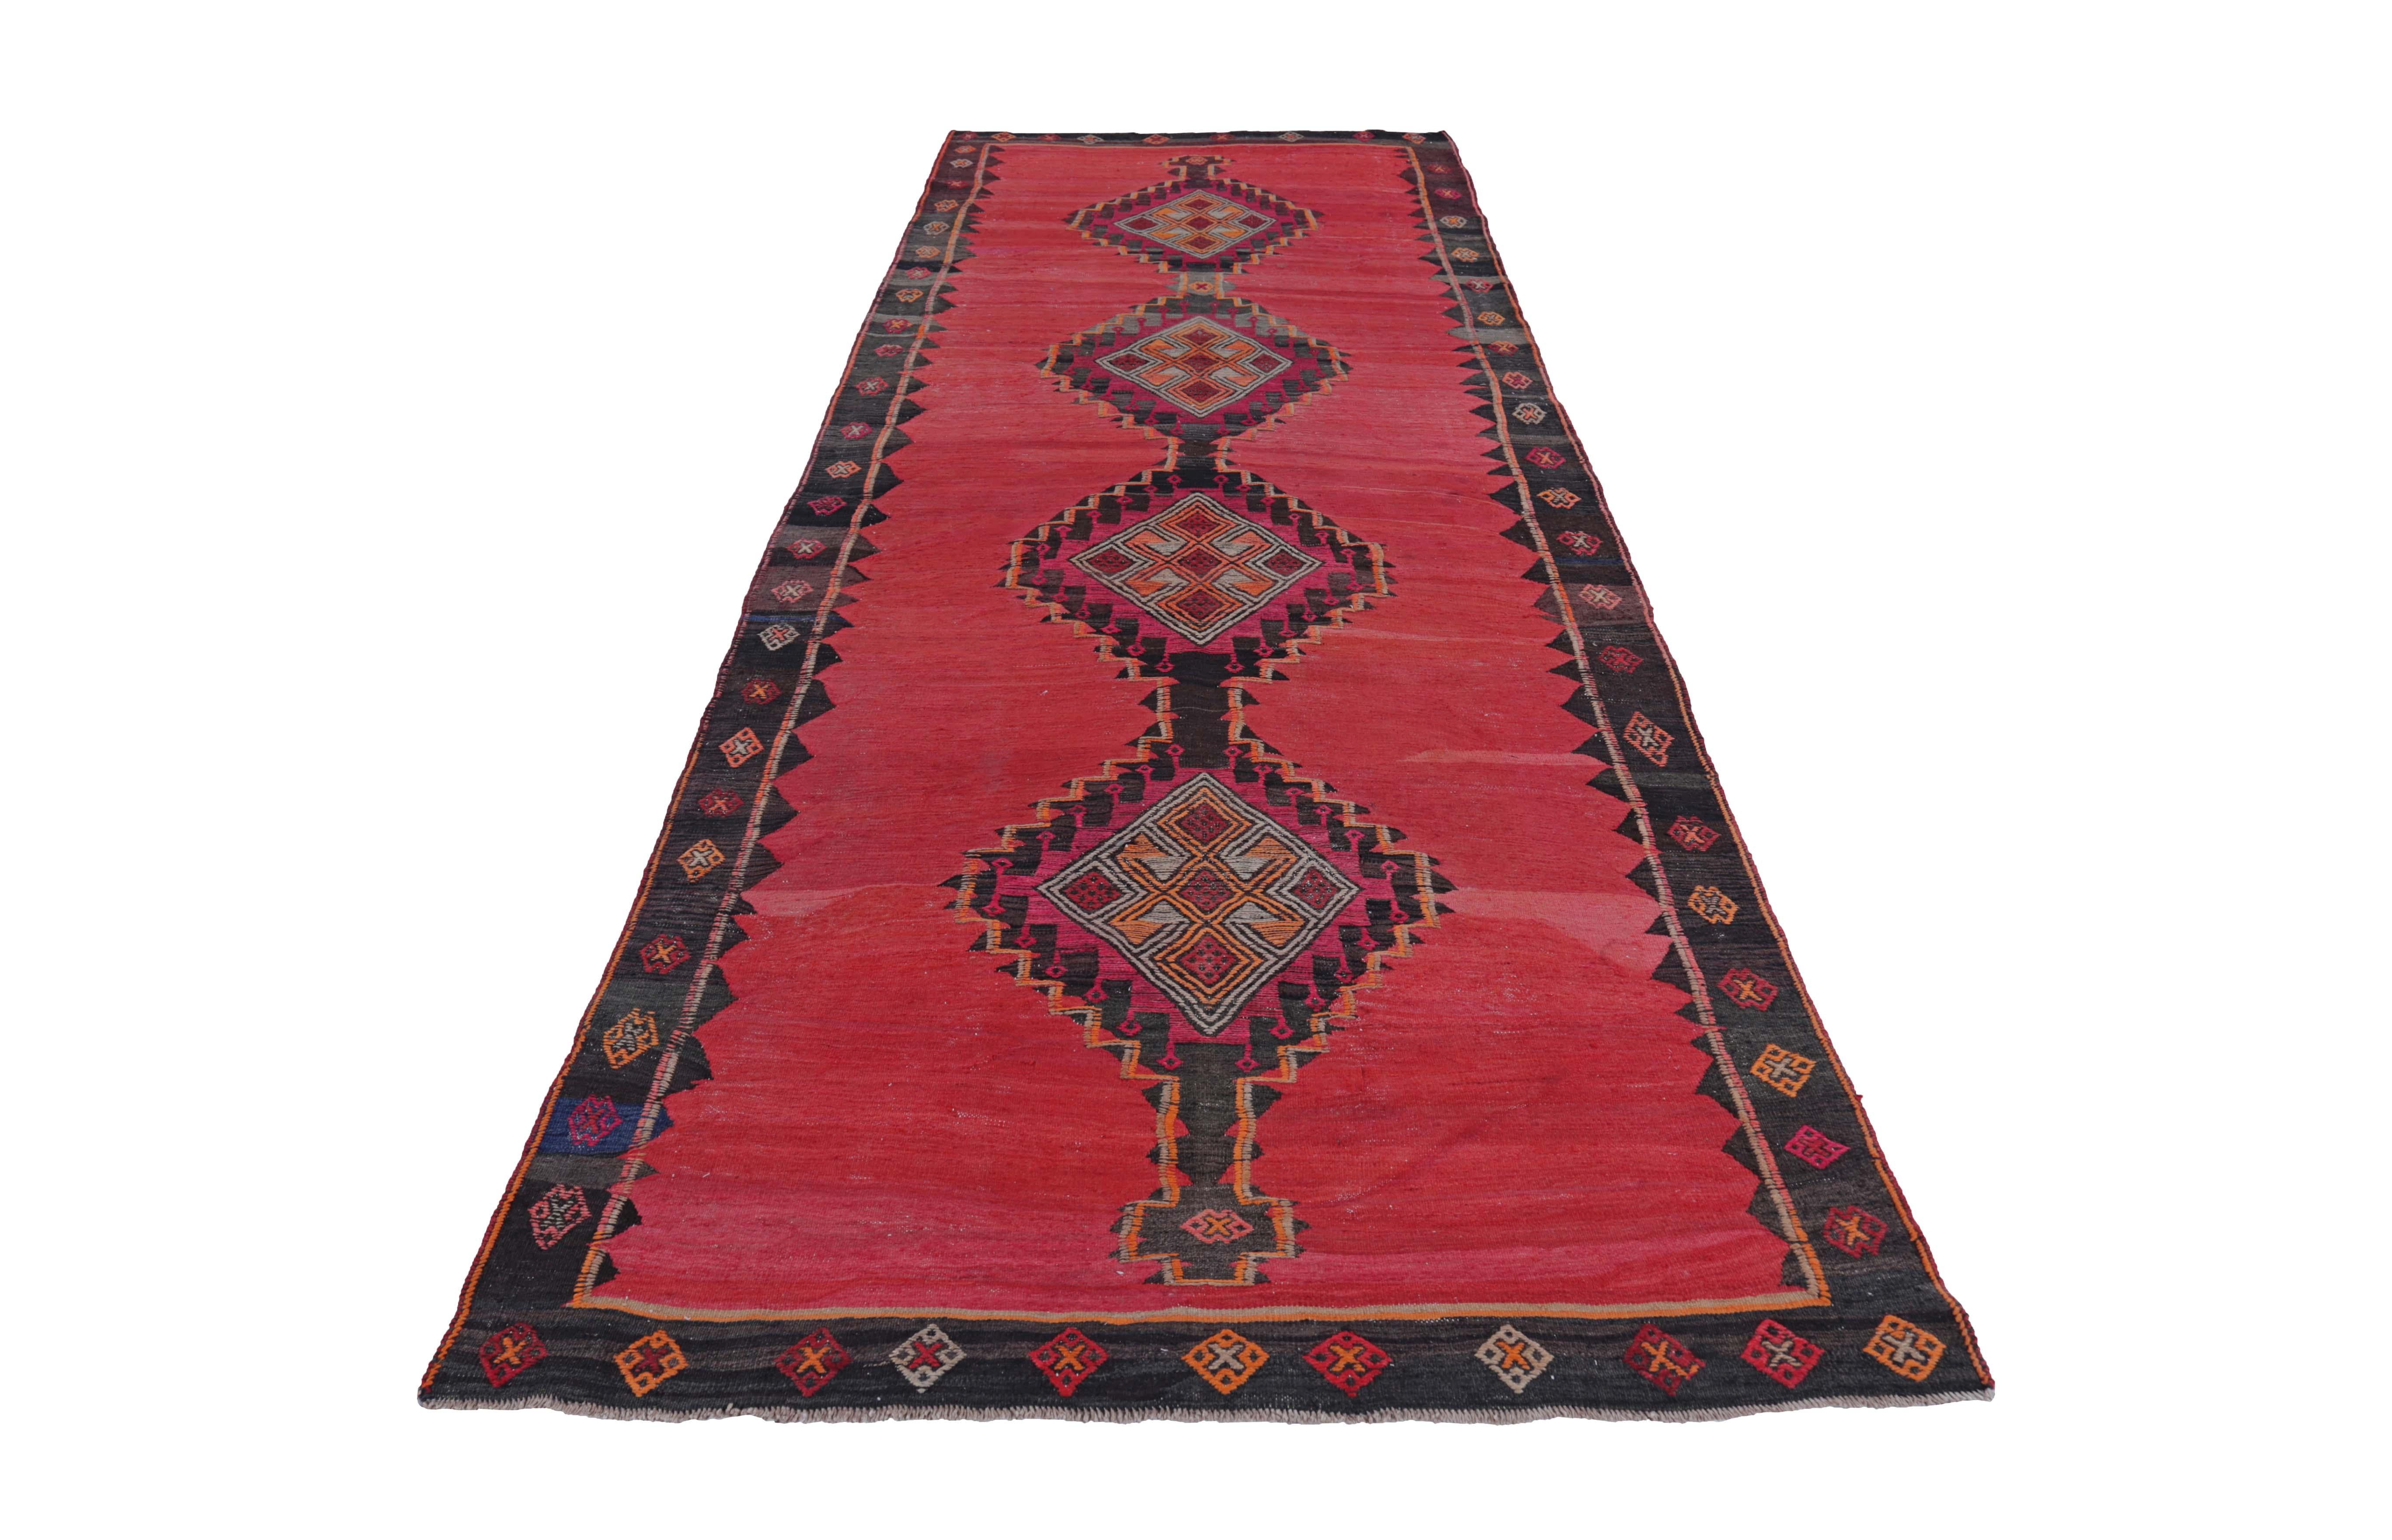 Turkish Kilim runner rug handwoven from the finest sheep’s wool and colored with all-natural vegetable dyes that are safe for humans and pets. It’s a traditional Kilim flat-weave design featuring red, black and orange diamond patterns. It’s a